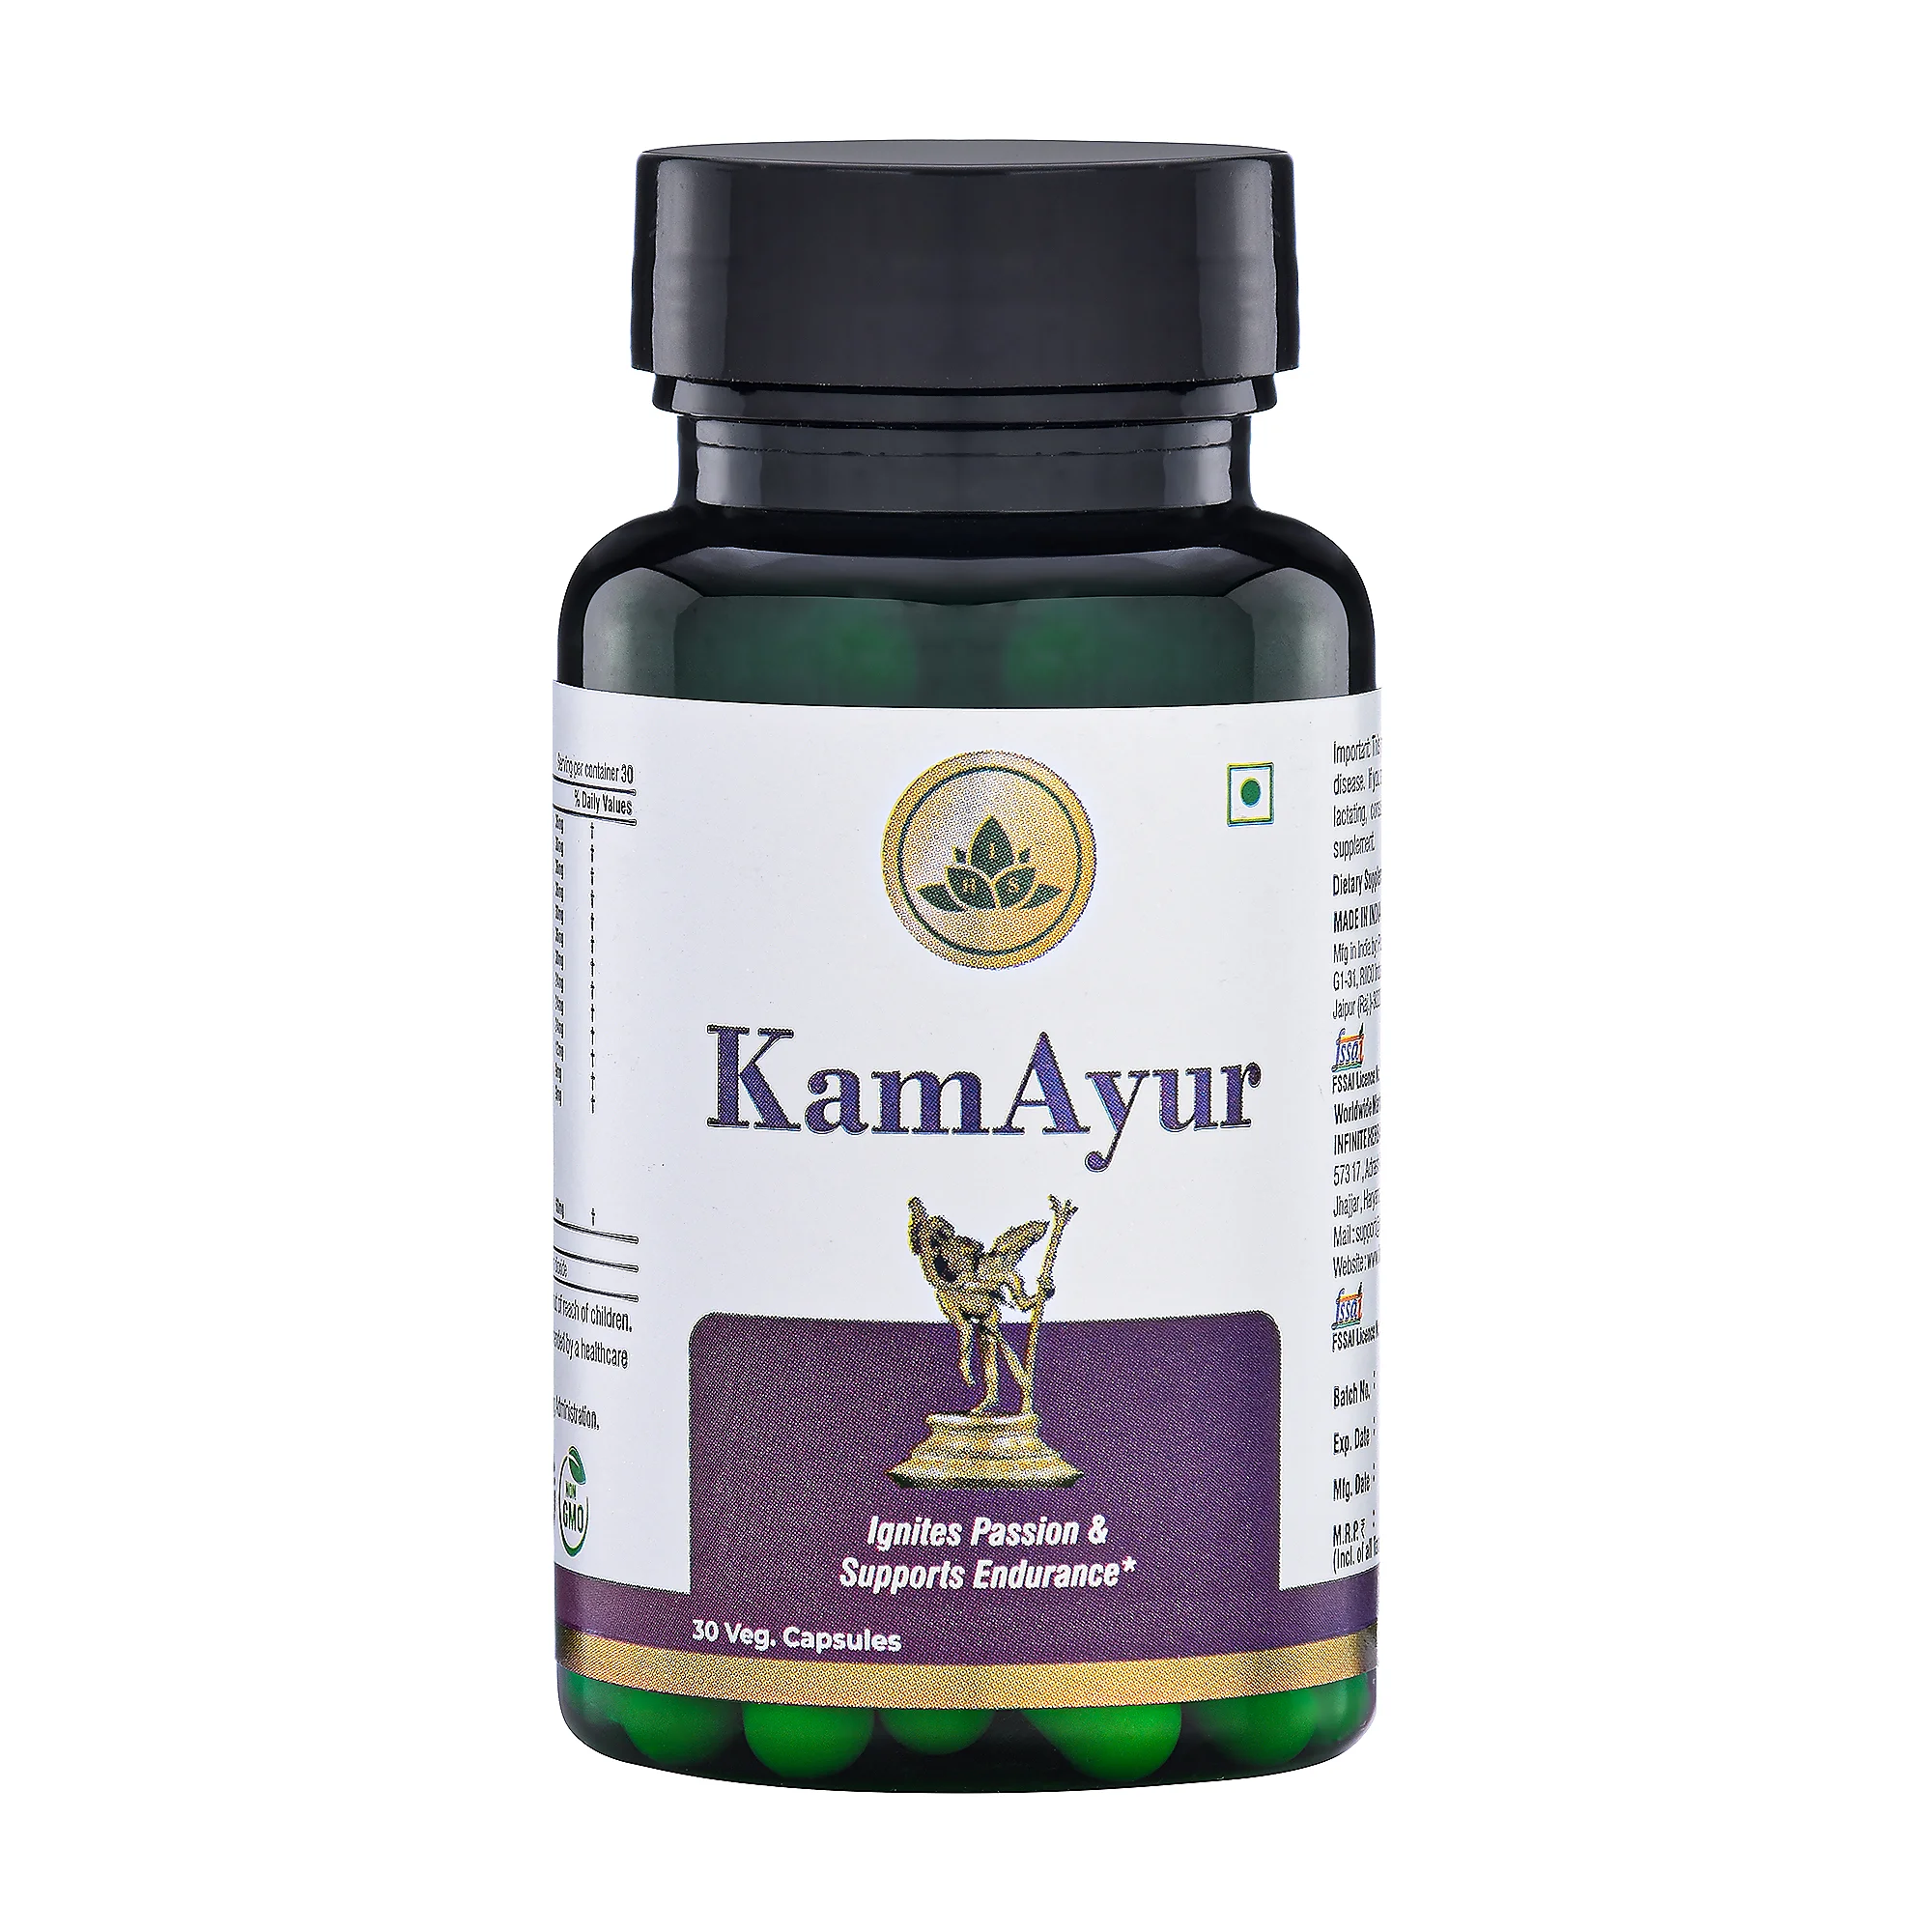 Kamayur Increases testosterone levels and helps improve libido and proper erection